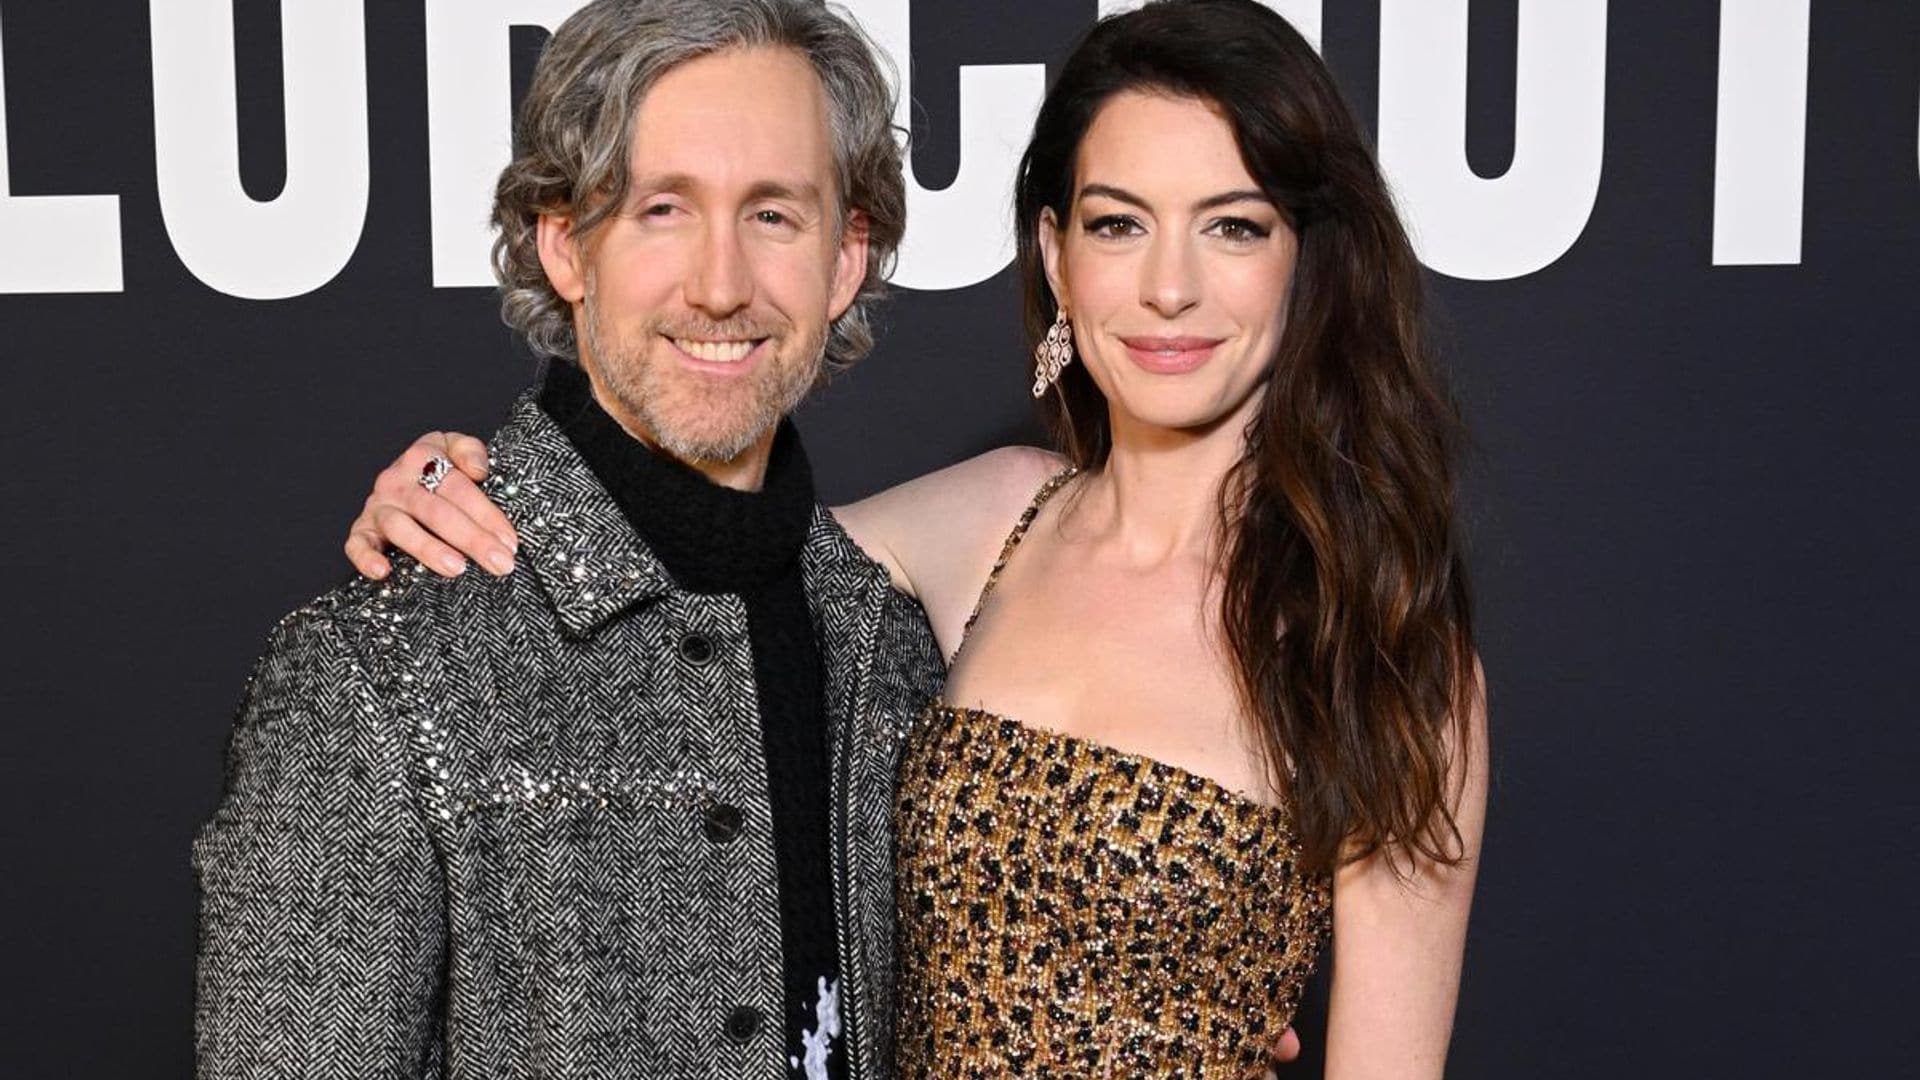 Anne Hathaway’s matching tattoo with her husband: ‘We make each other better’